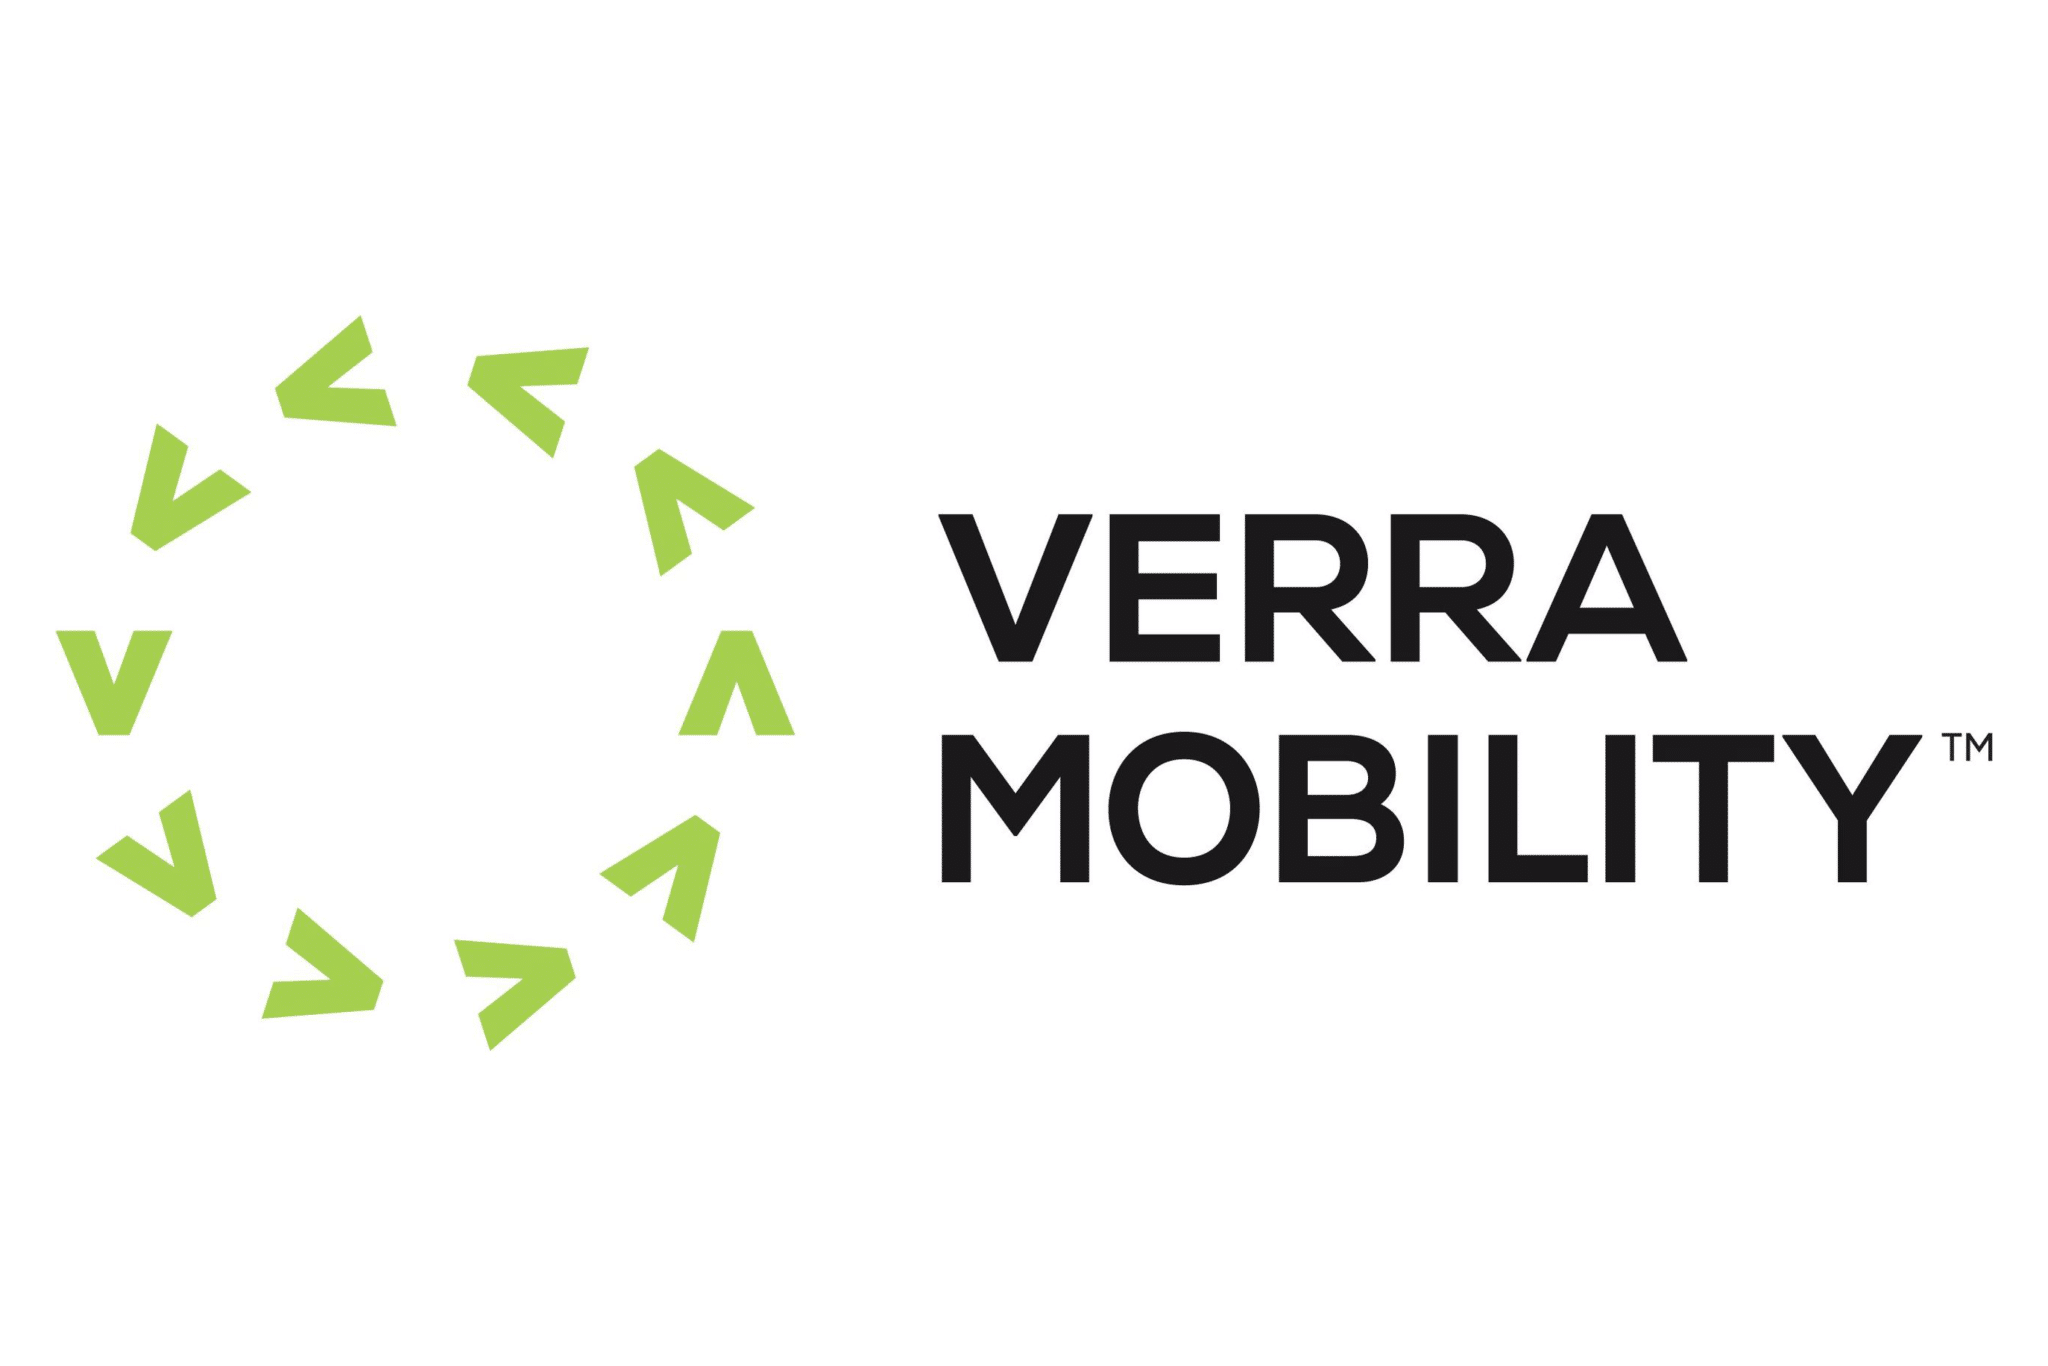 Verra mobility logo with green parking arrows.